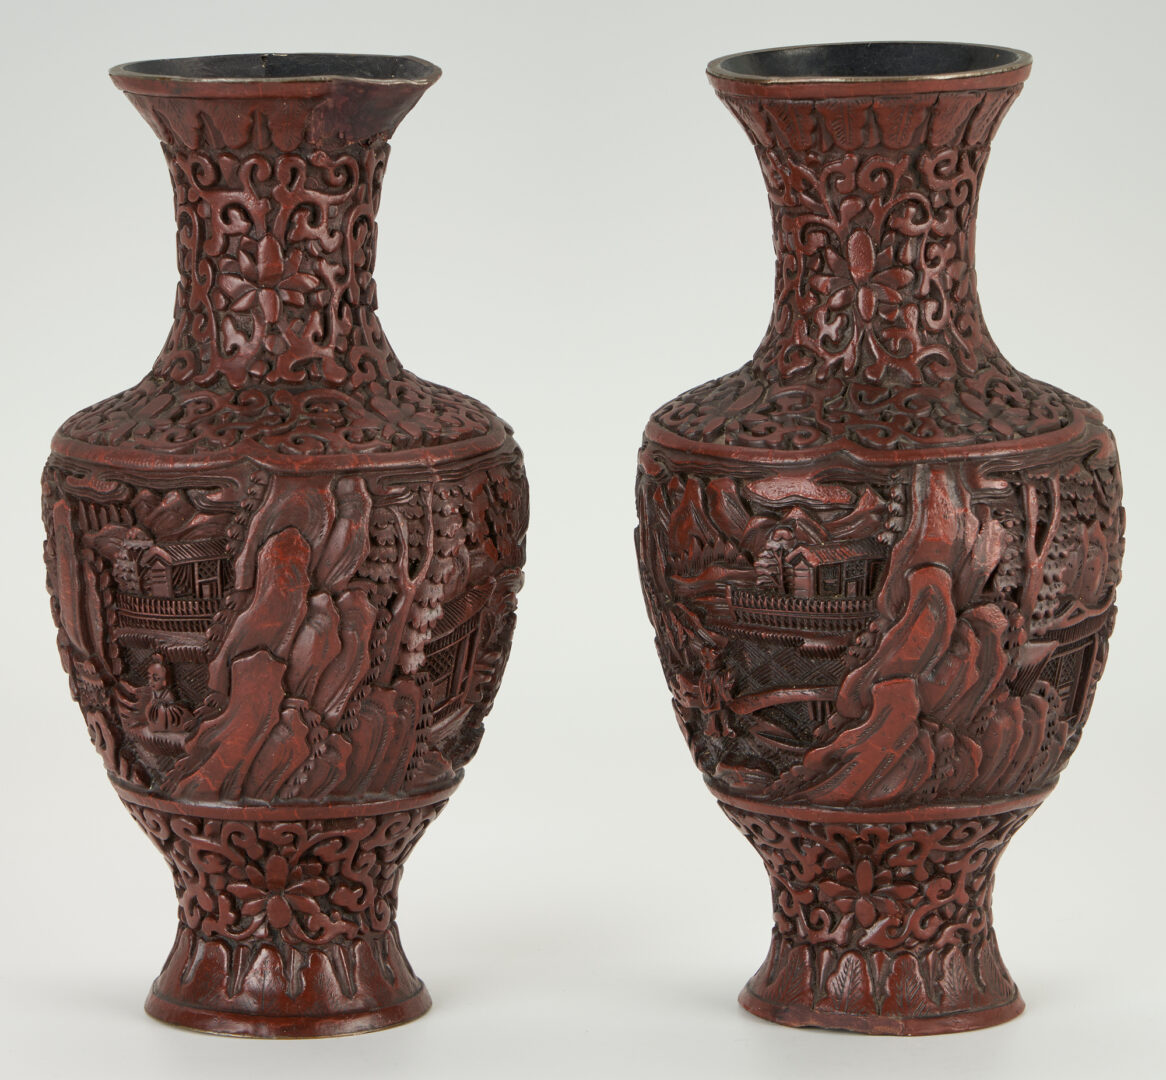 Lot 27: 2 Carved Chinese Buddhist Figures plus Pr. Cinnabar Tixi Lacquer Vases